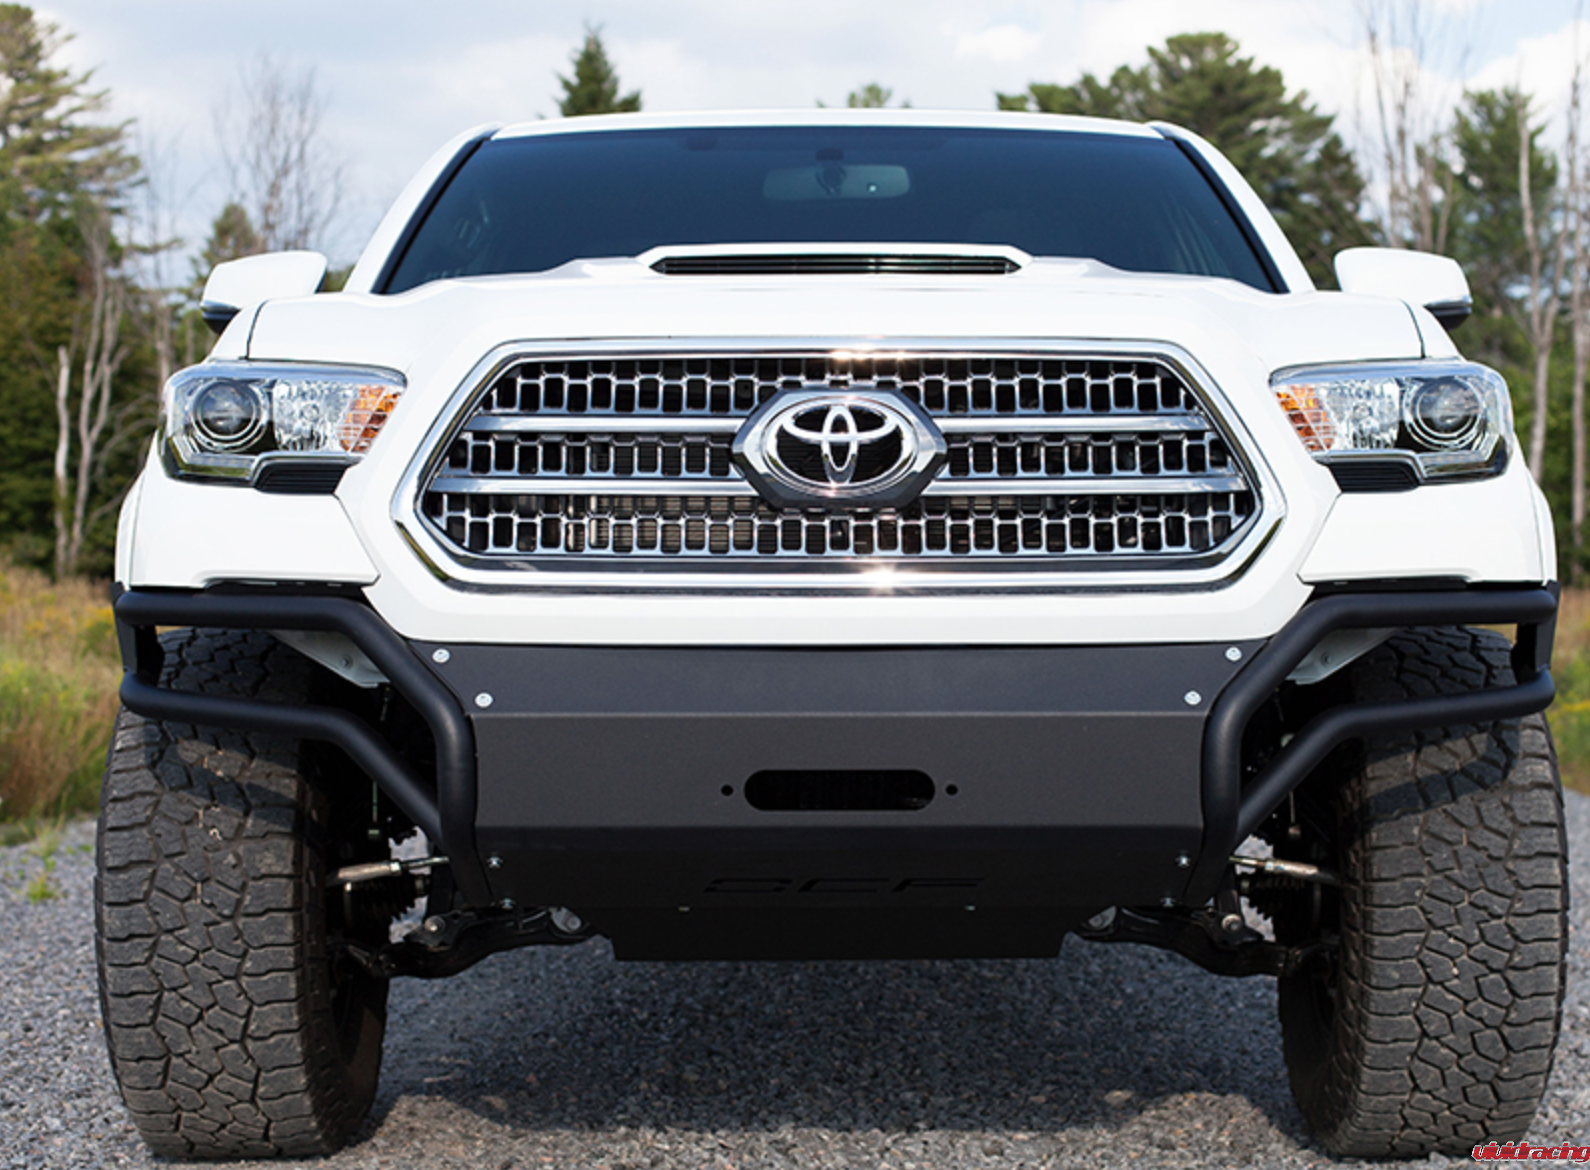 MBRP, Toyota, Tacoma, front winch bumper, offroad, headlight, light bar